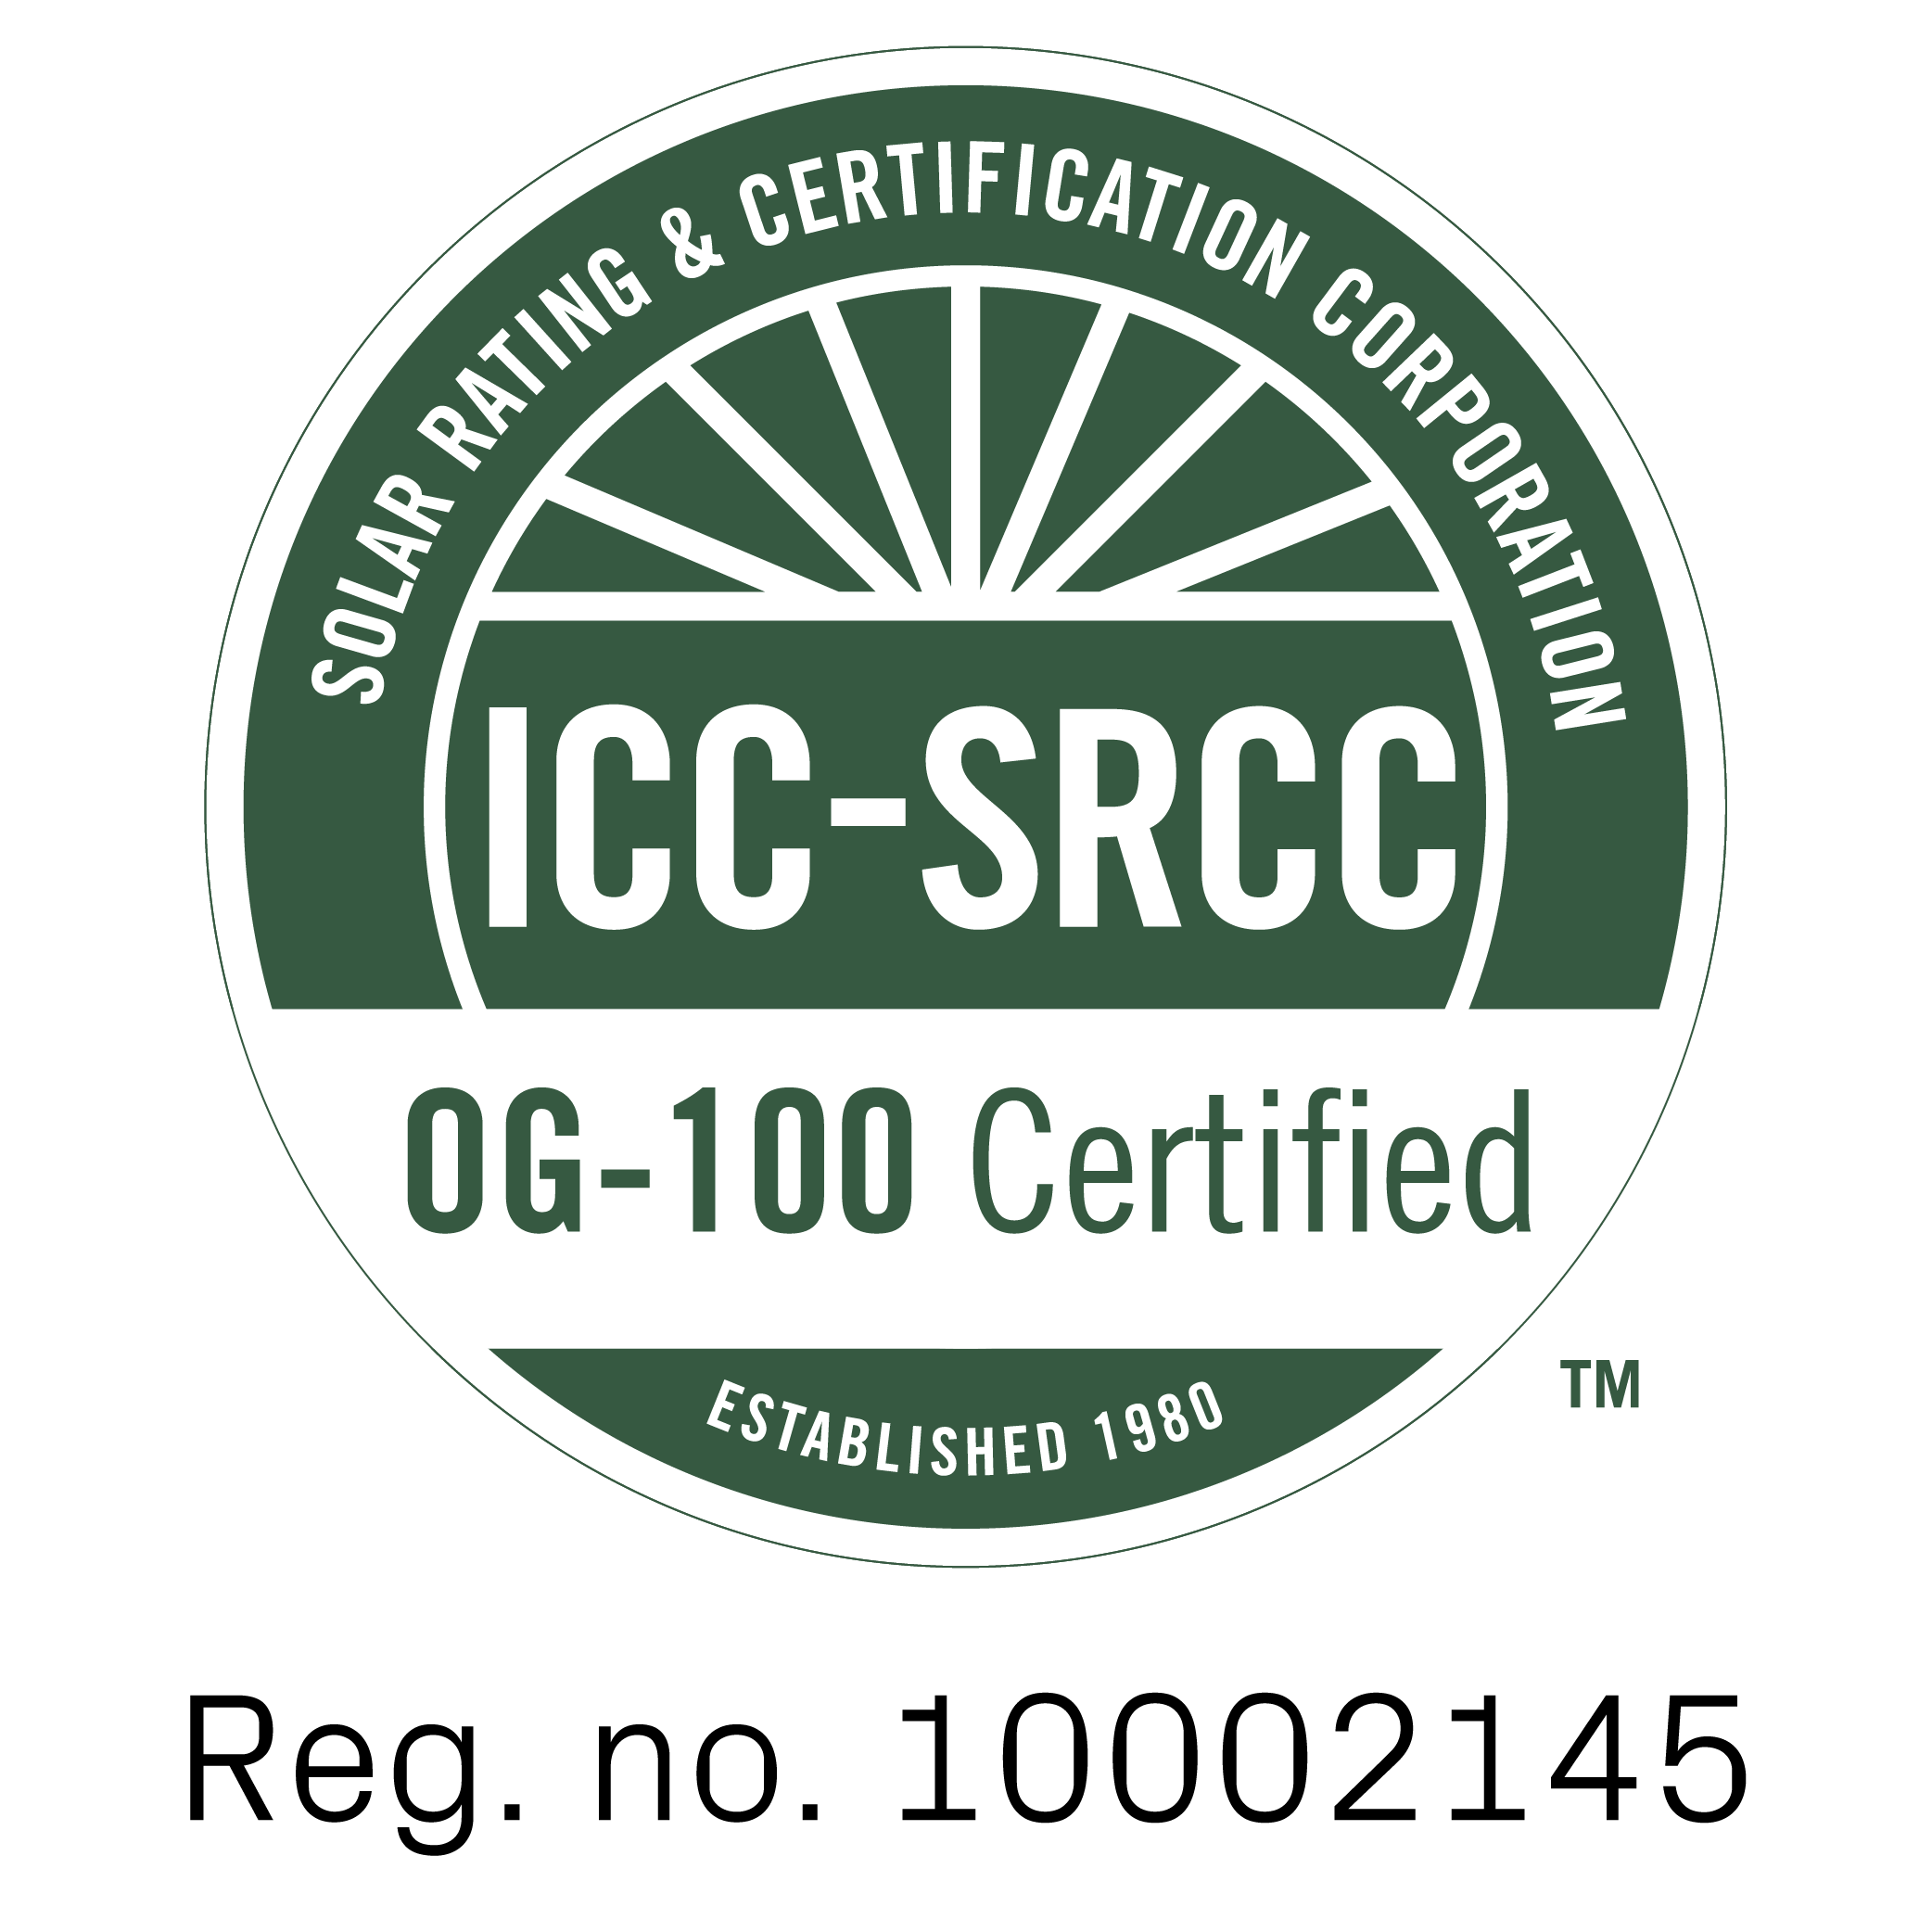 T160 certified by ICC-SRCC™ 